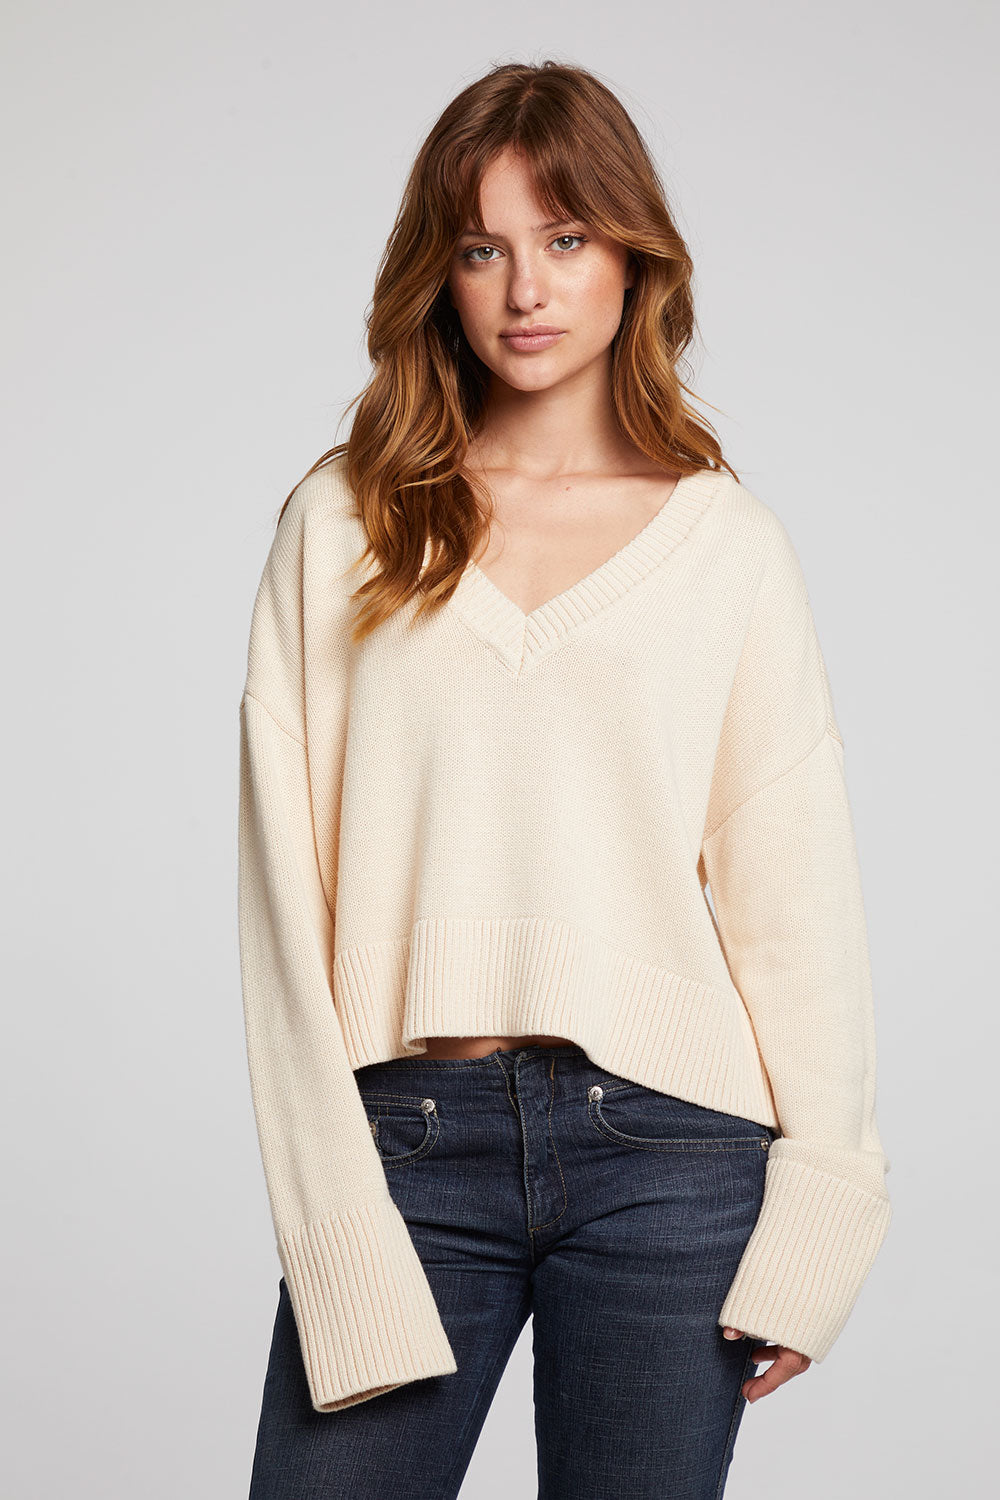 Bolinas Whitecap Grey Pullover WOMENS chaserbrand